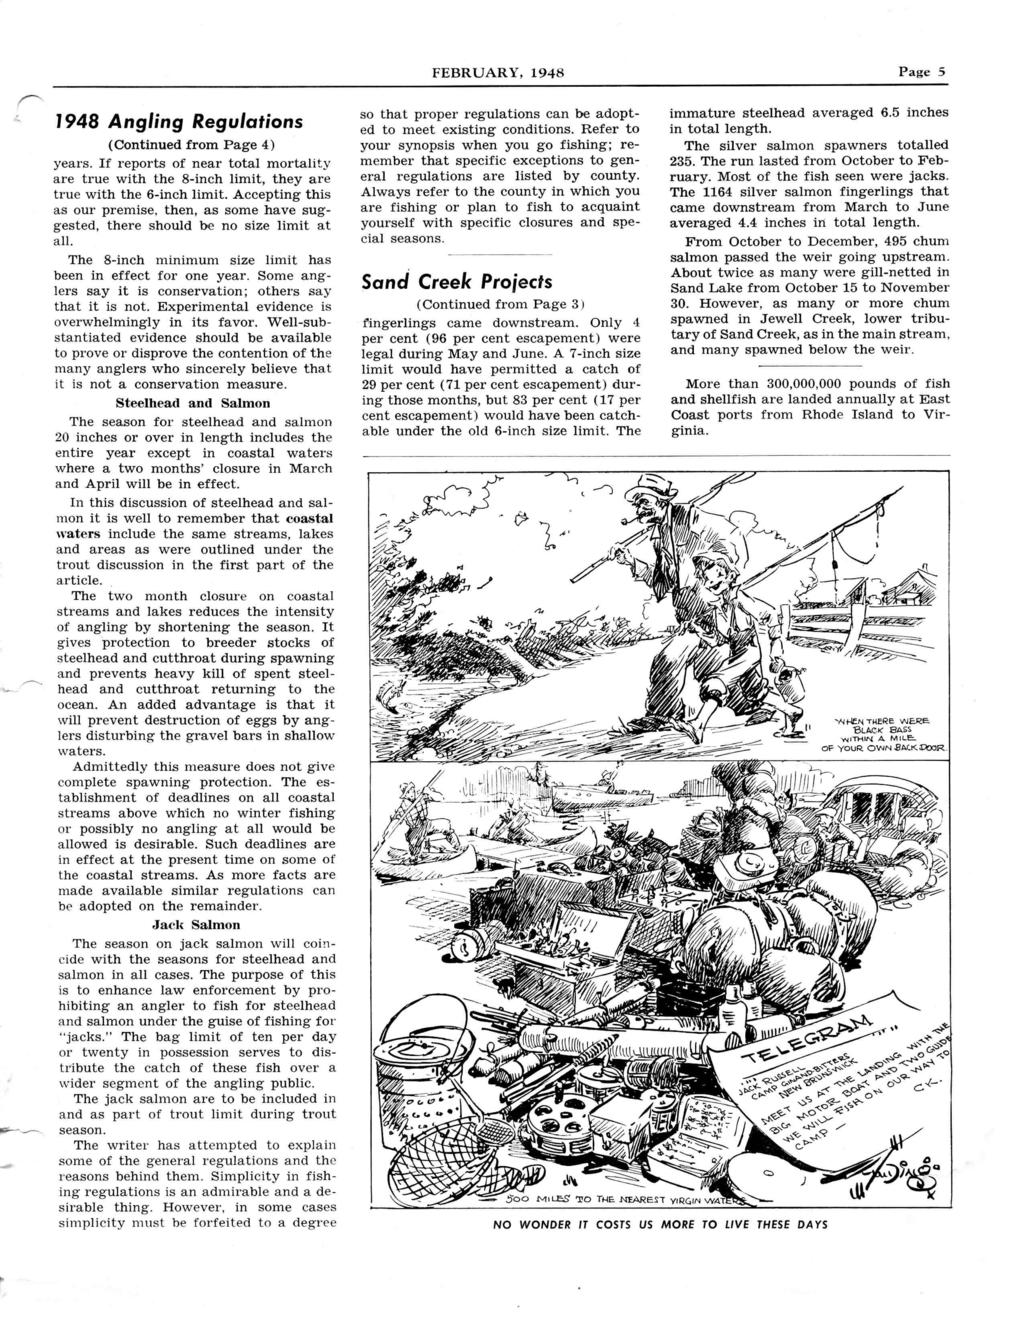 FEBRUARY, 1948 Page 5 1948 Angling Regulations (Continued from Page 4) years. If reports of near total mortality are true with the 8-inch limit, they are true with the 6-inch limit.